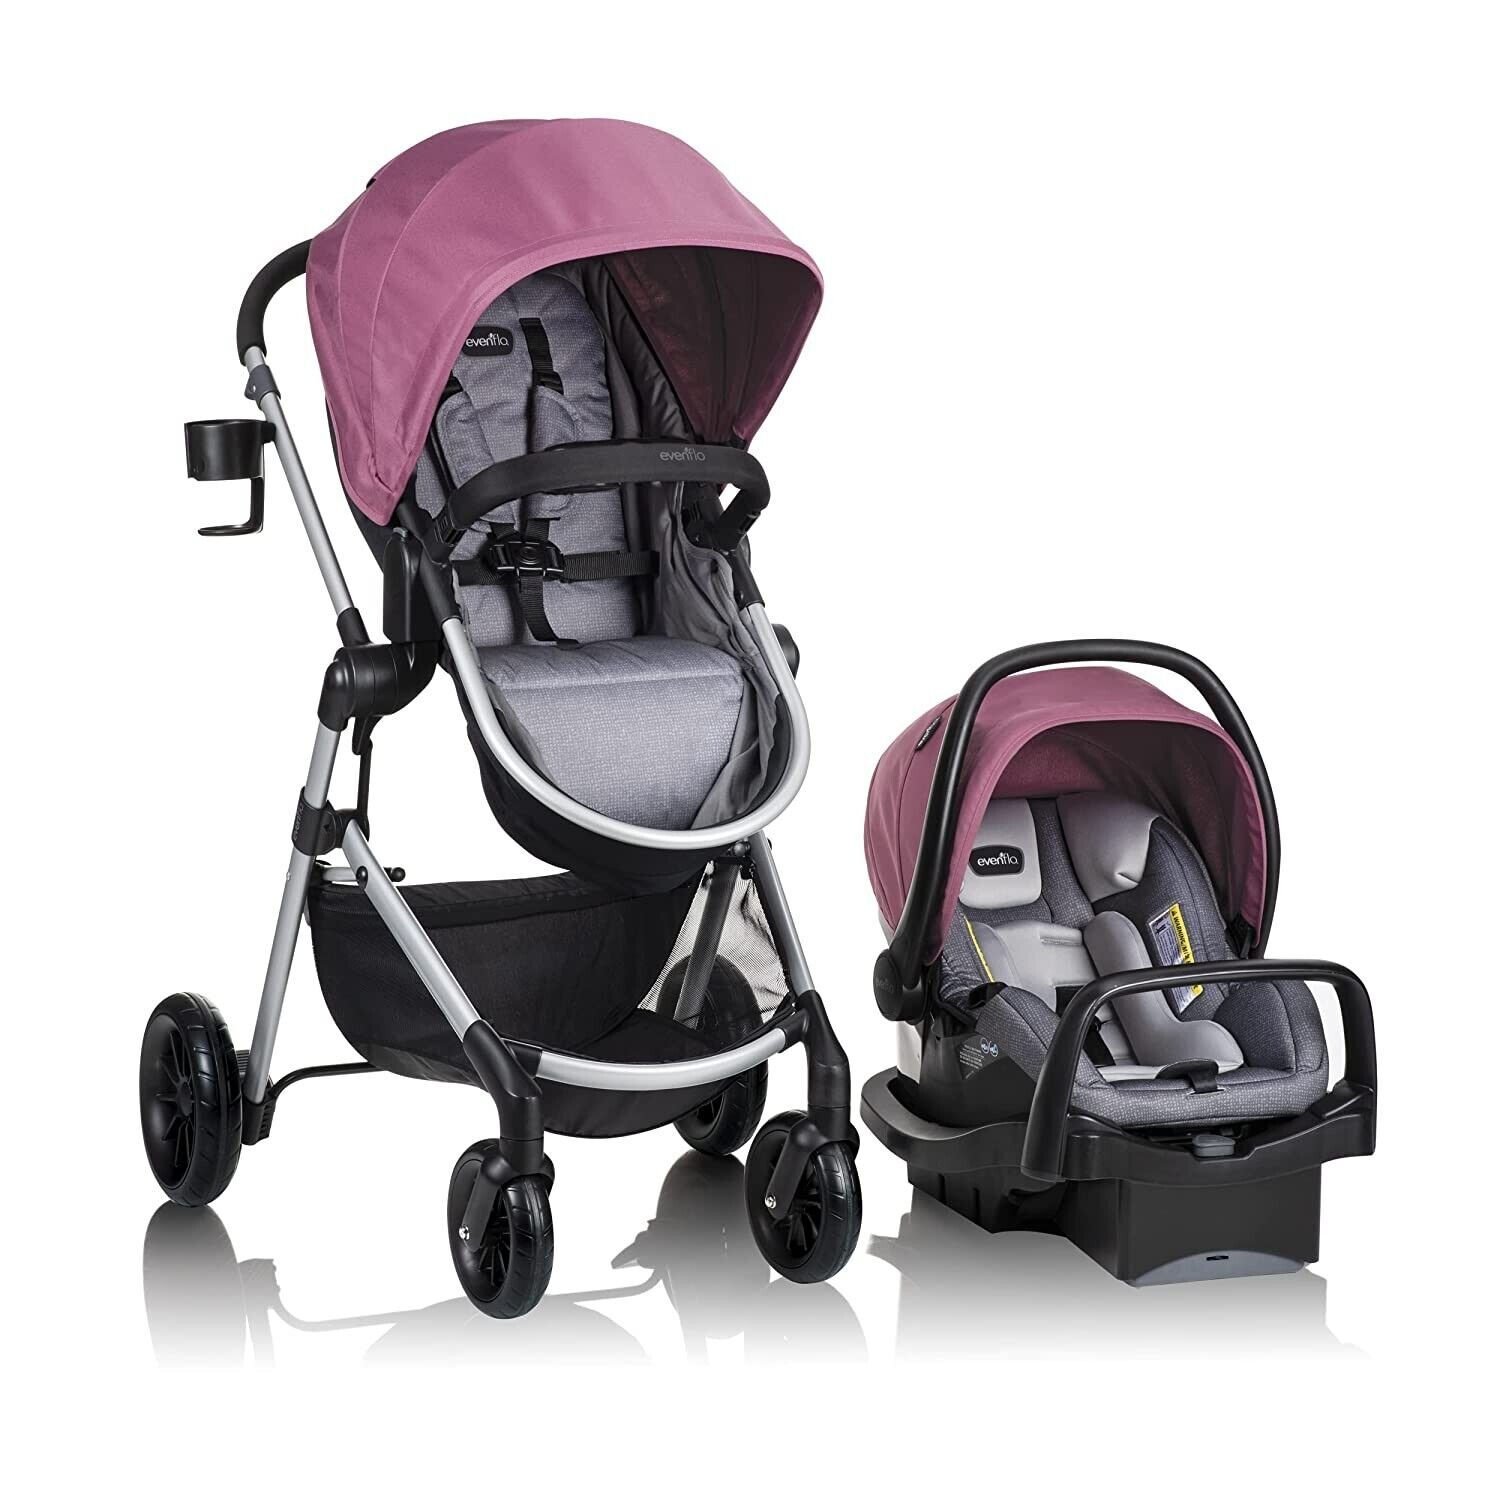 Evenflo Pivot Modular Stroller Travel System With SafeMax Car Seat, Dusty Rose